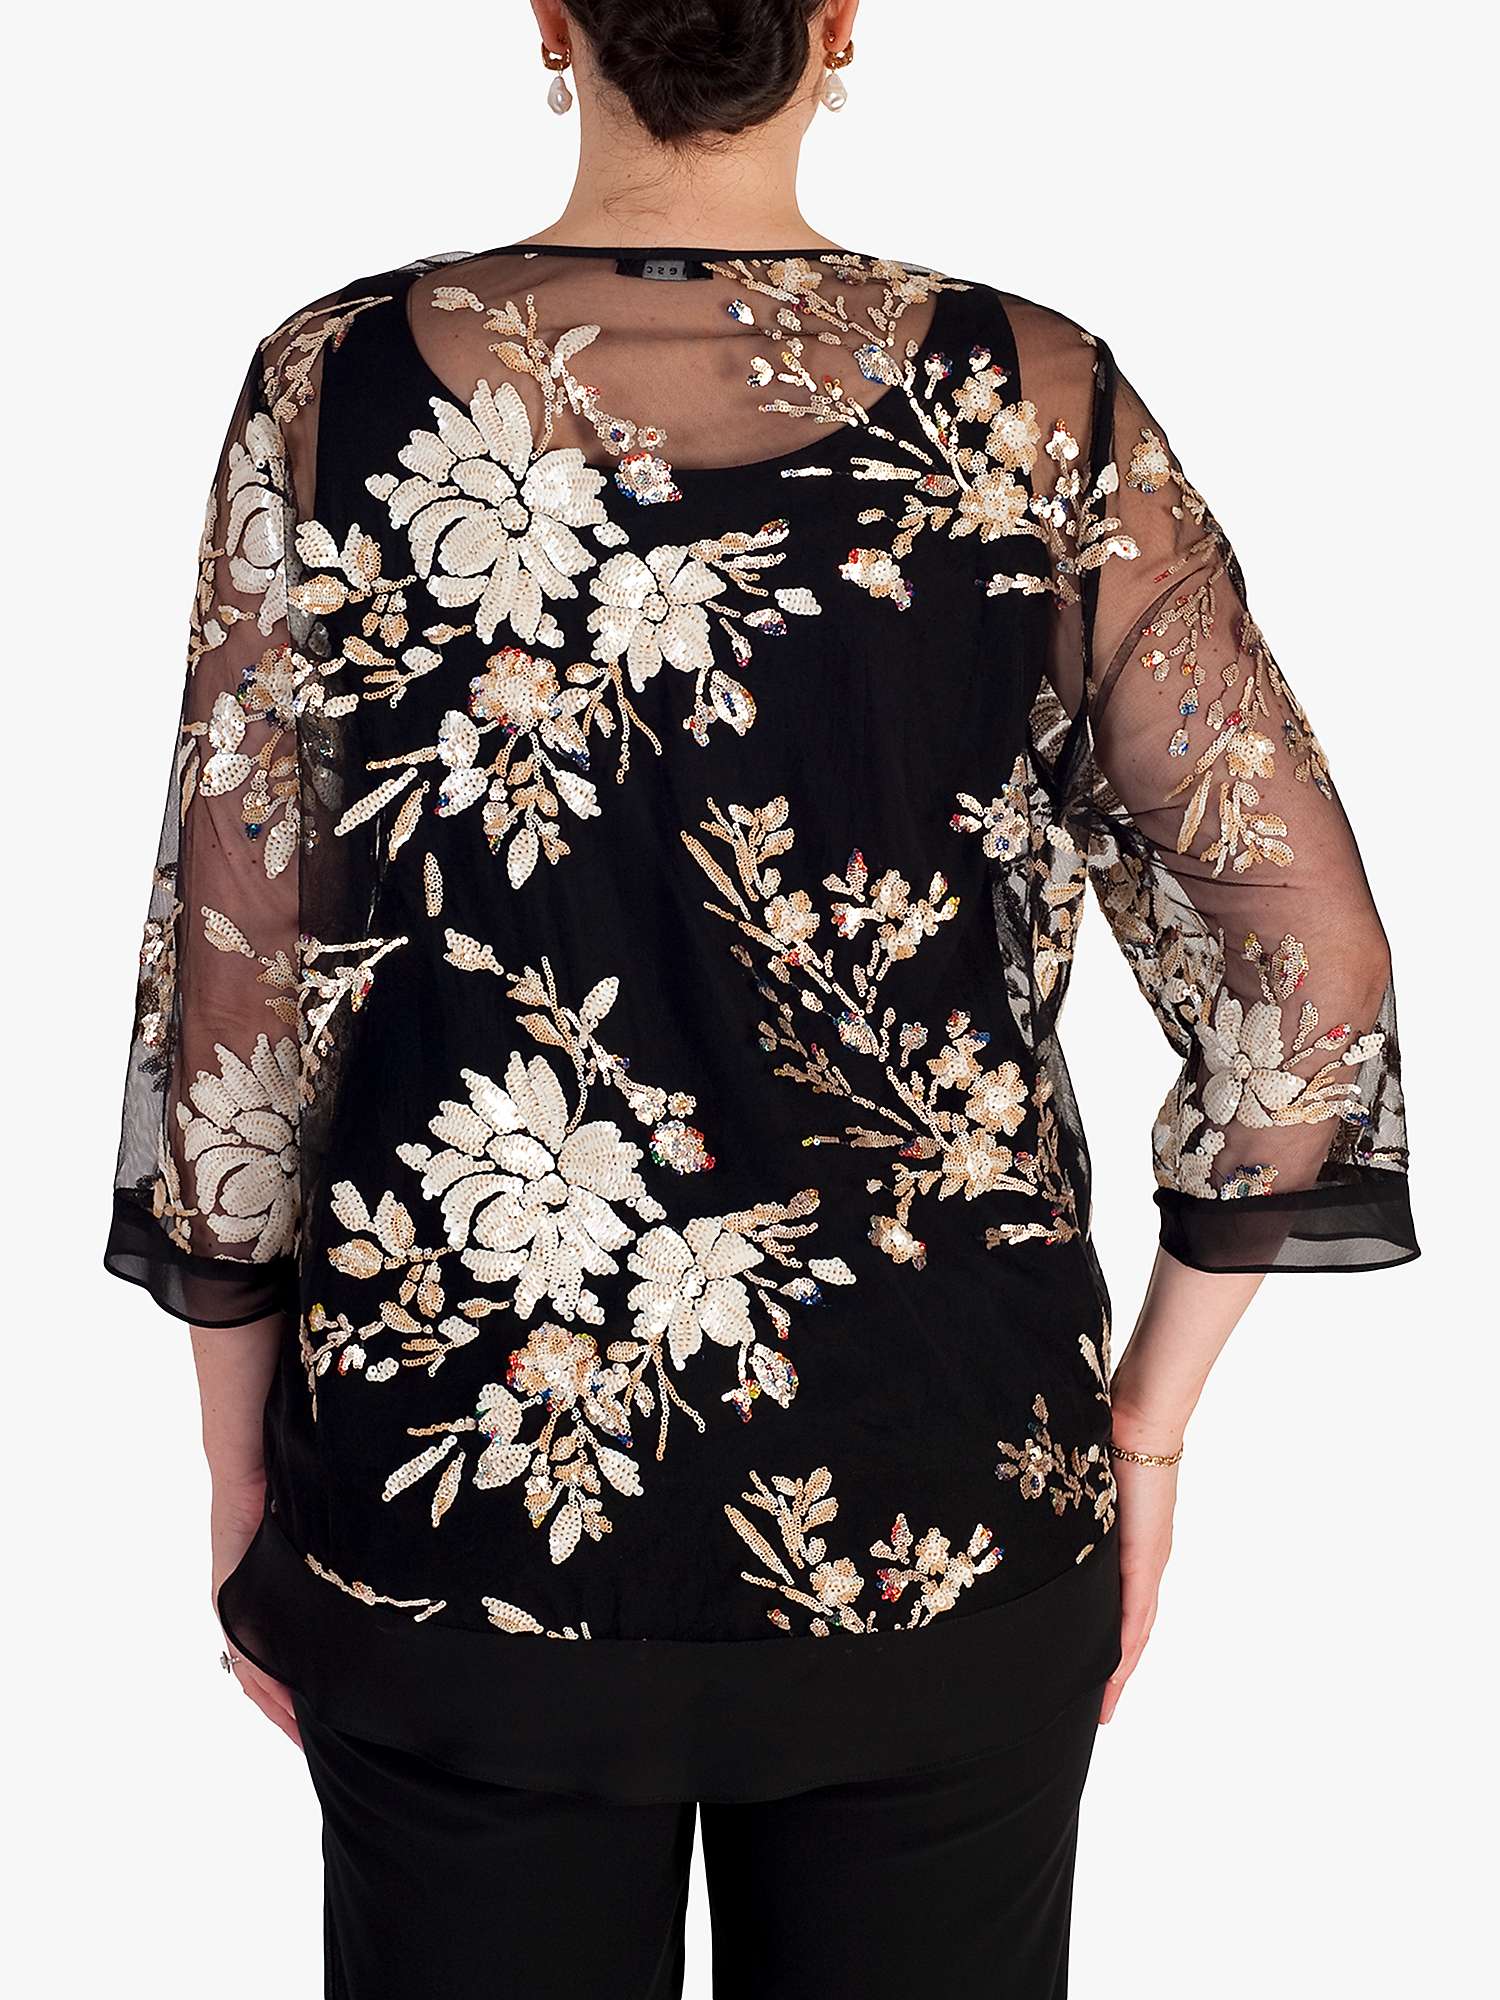 Buy chesca Embroidered Sequin Mesh Jacket, Black Online at johnlewis.com